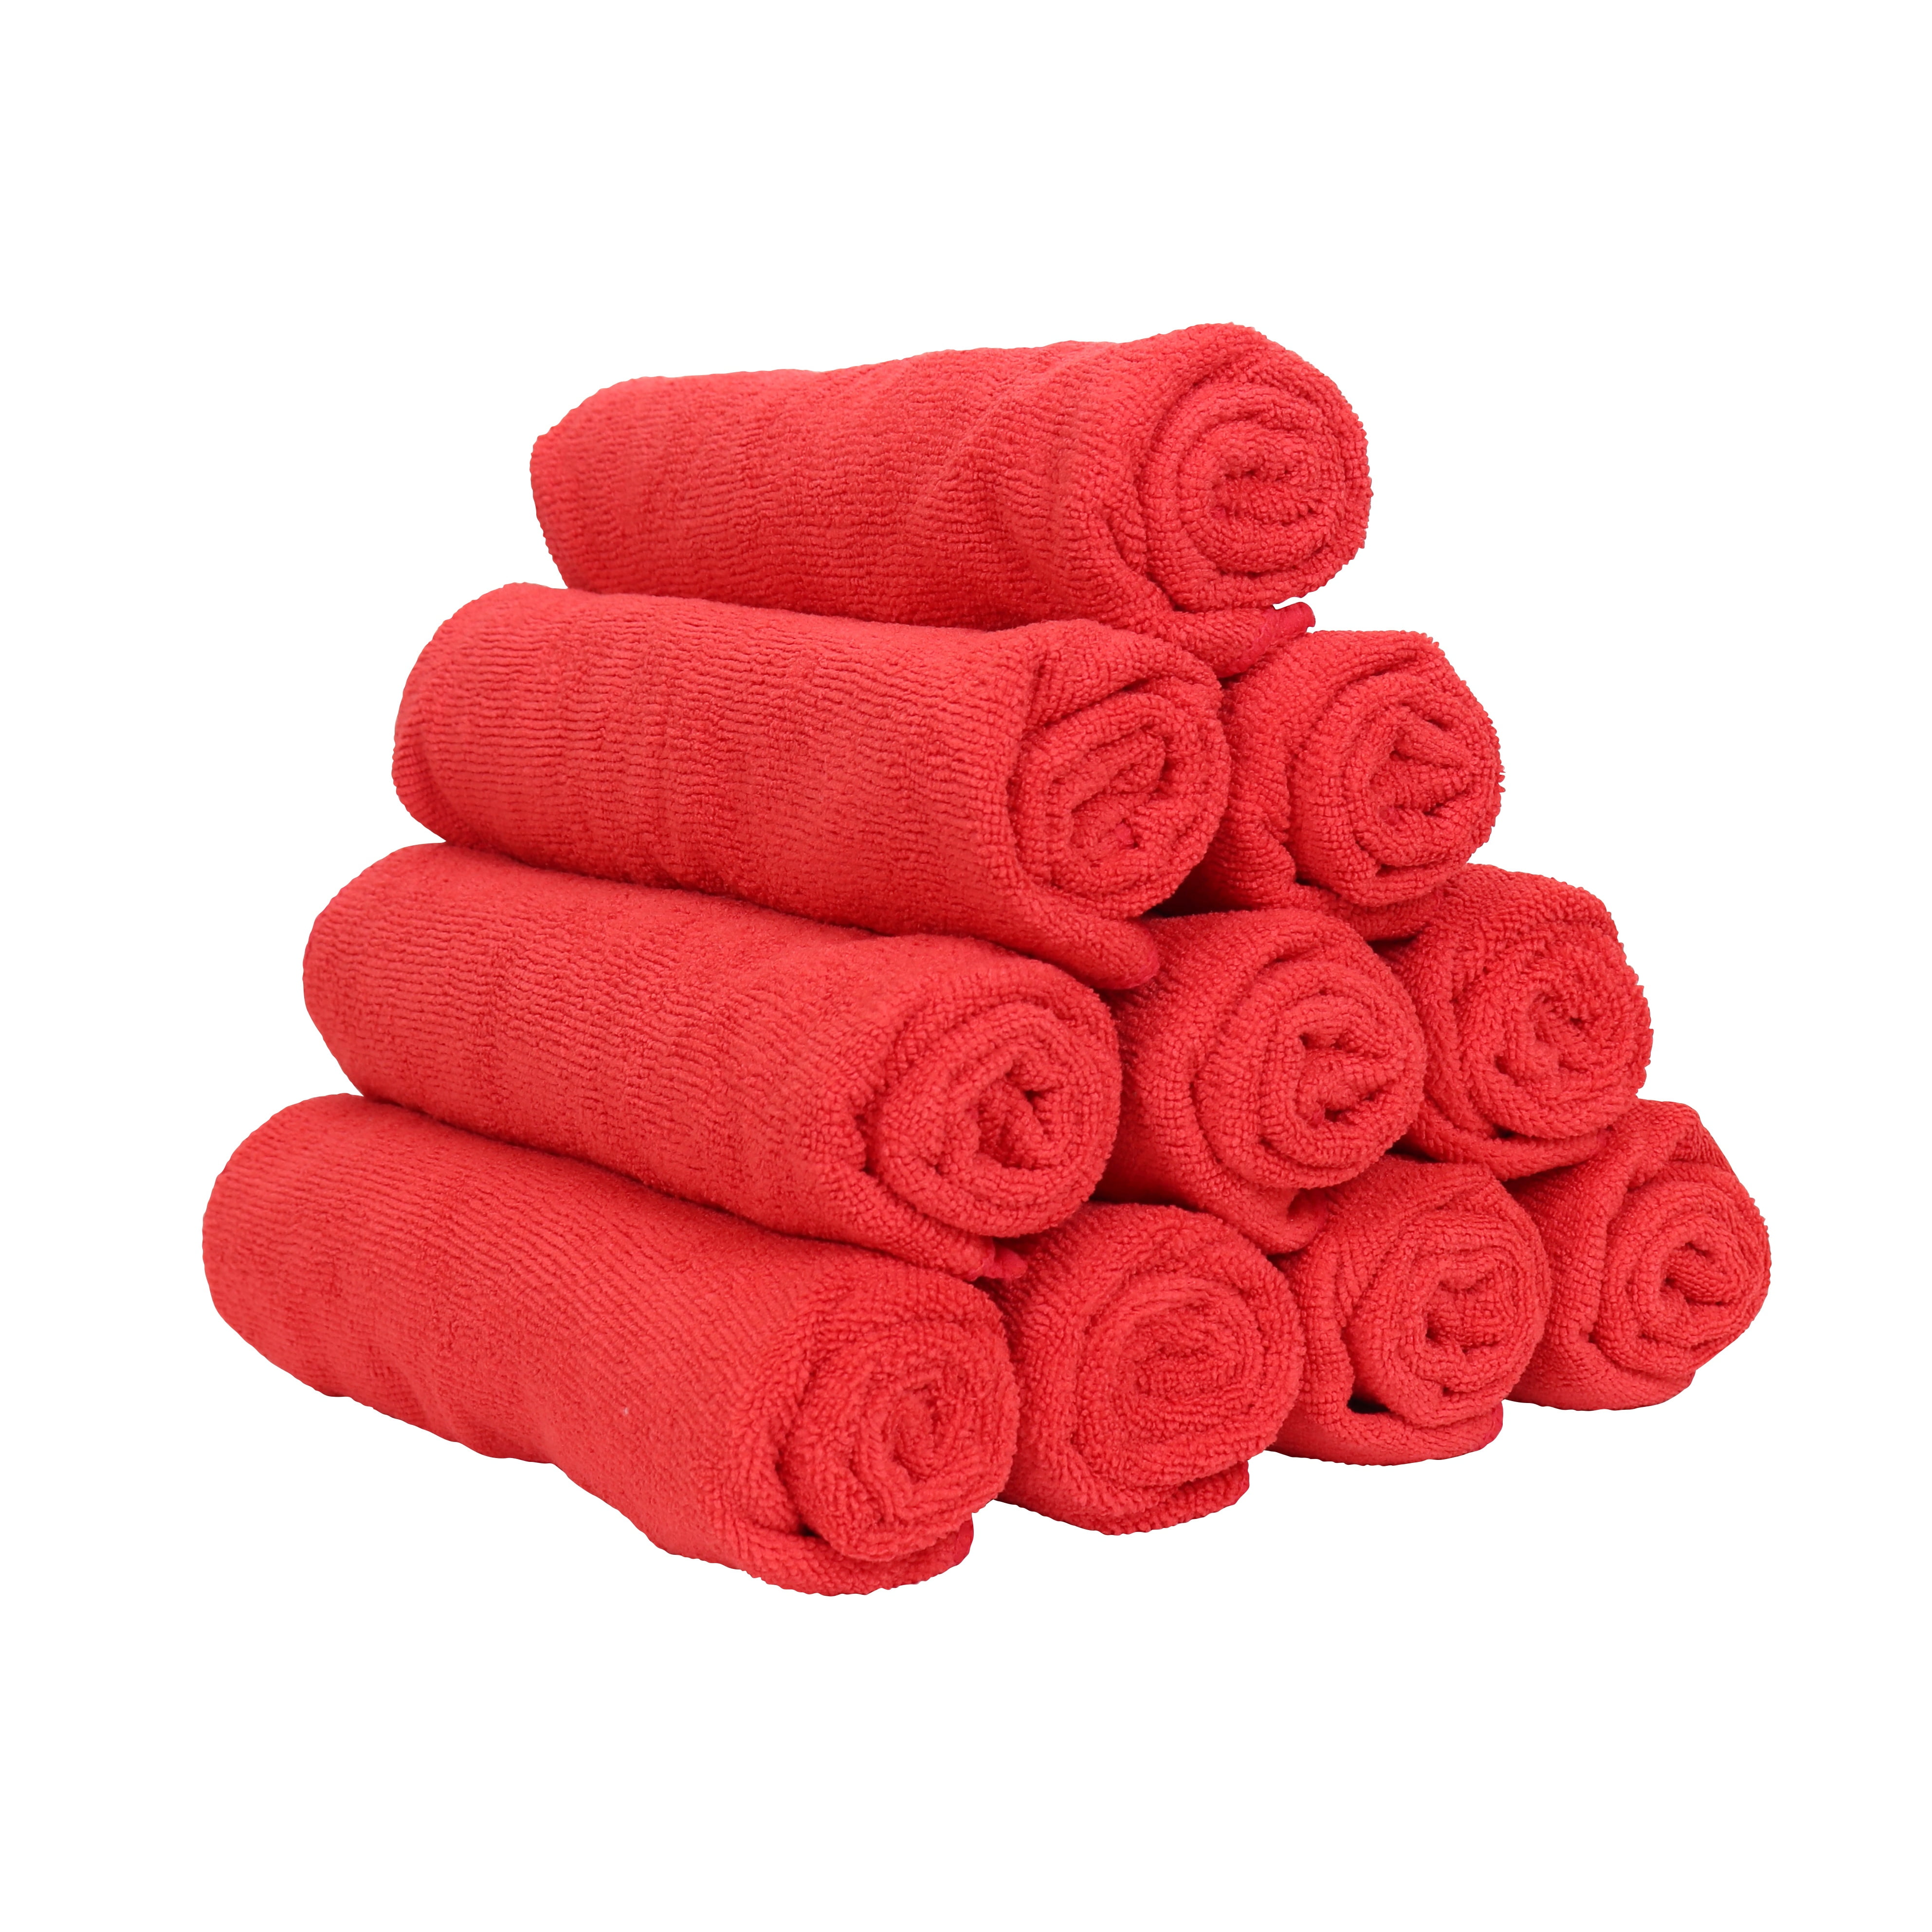 Arkwright Microfiber Hand Towels, 12 Pack, 15 x 24, Red